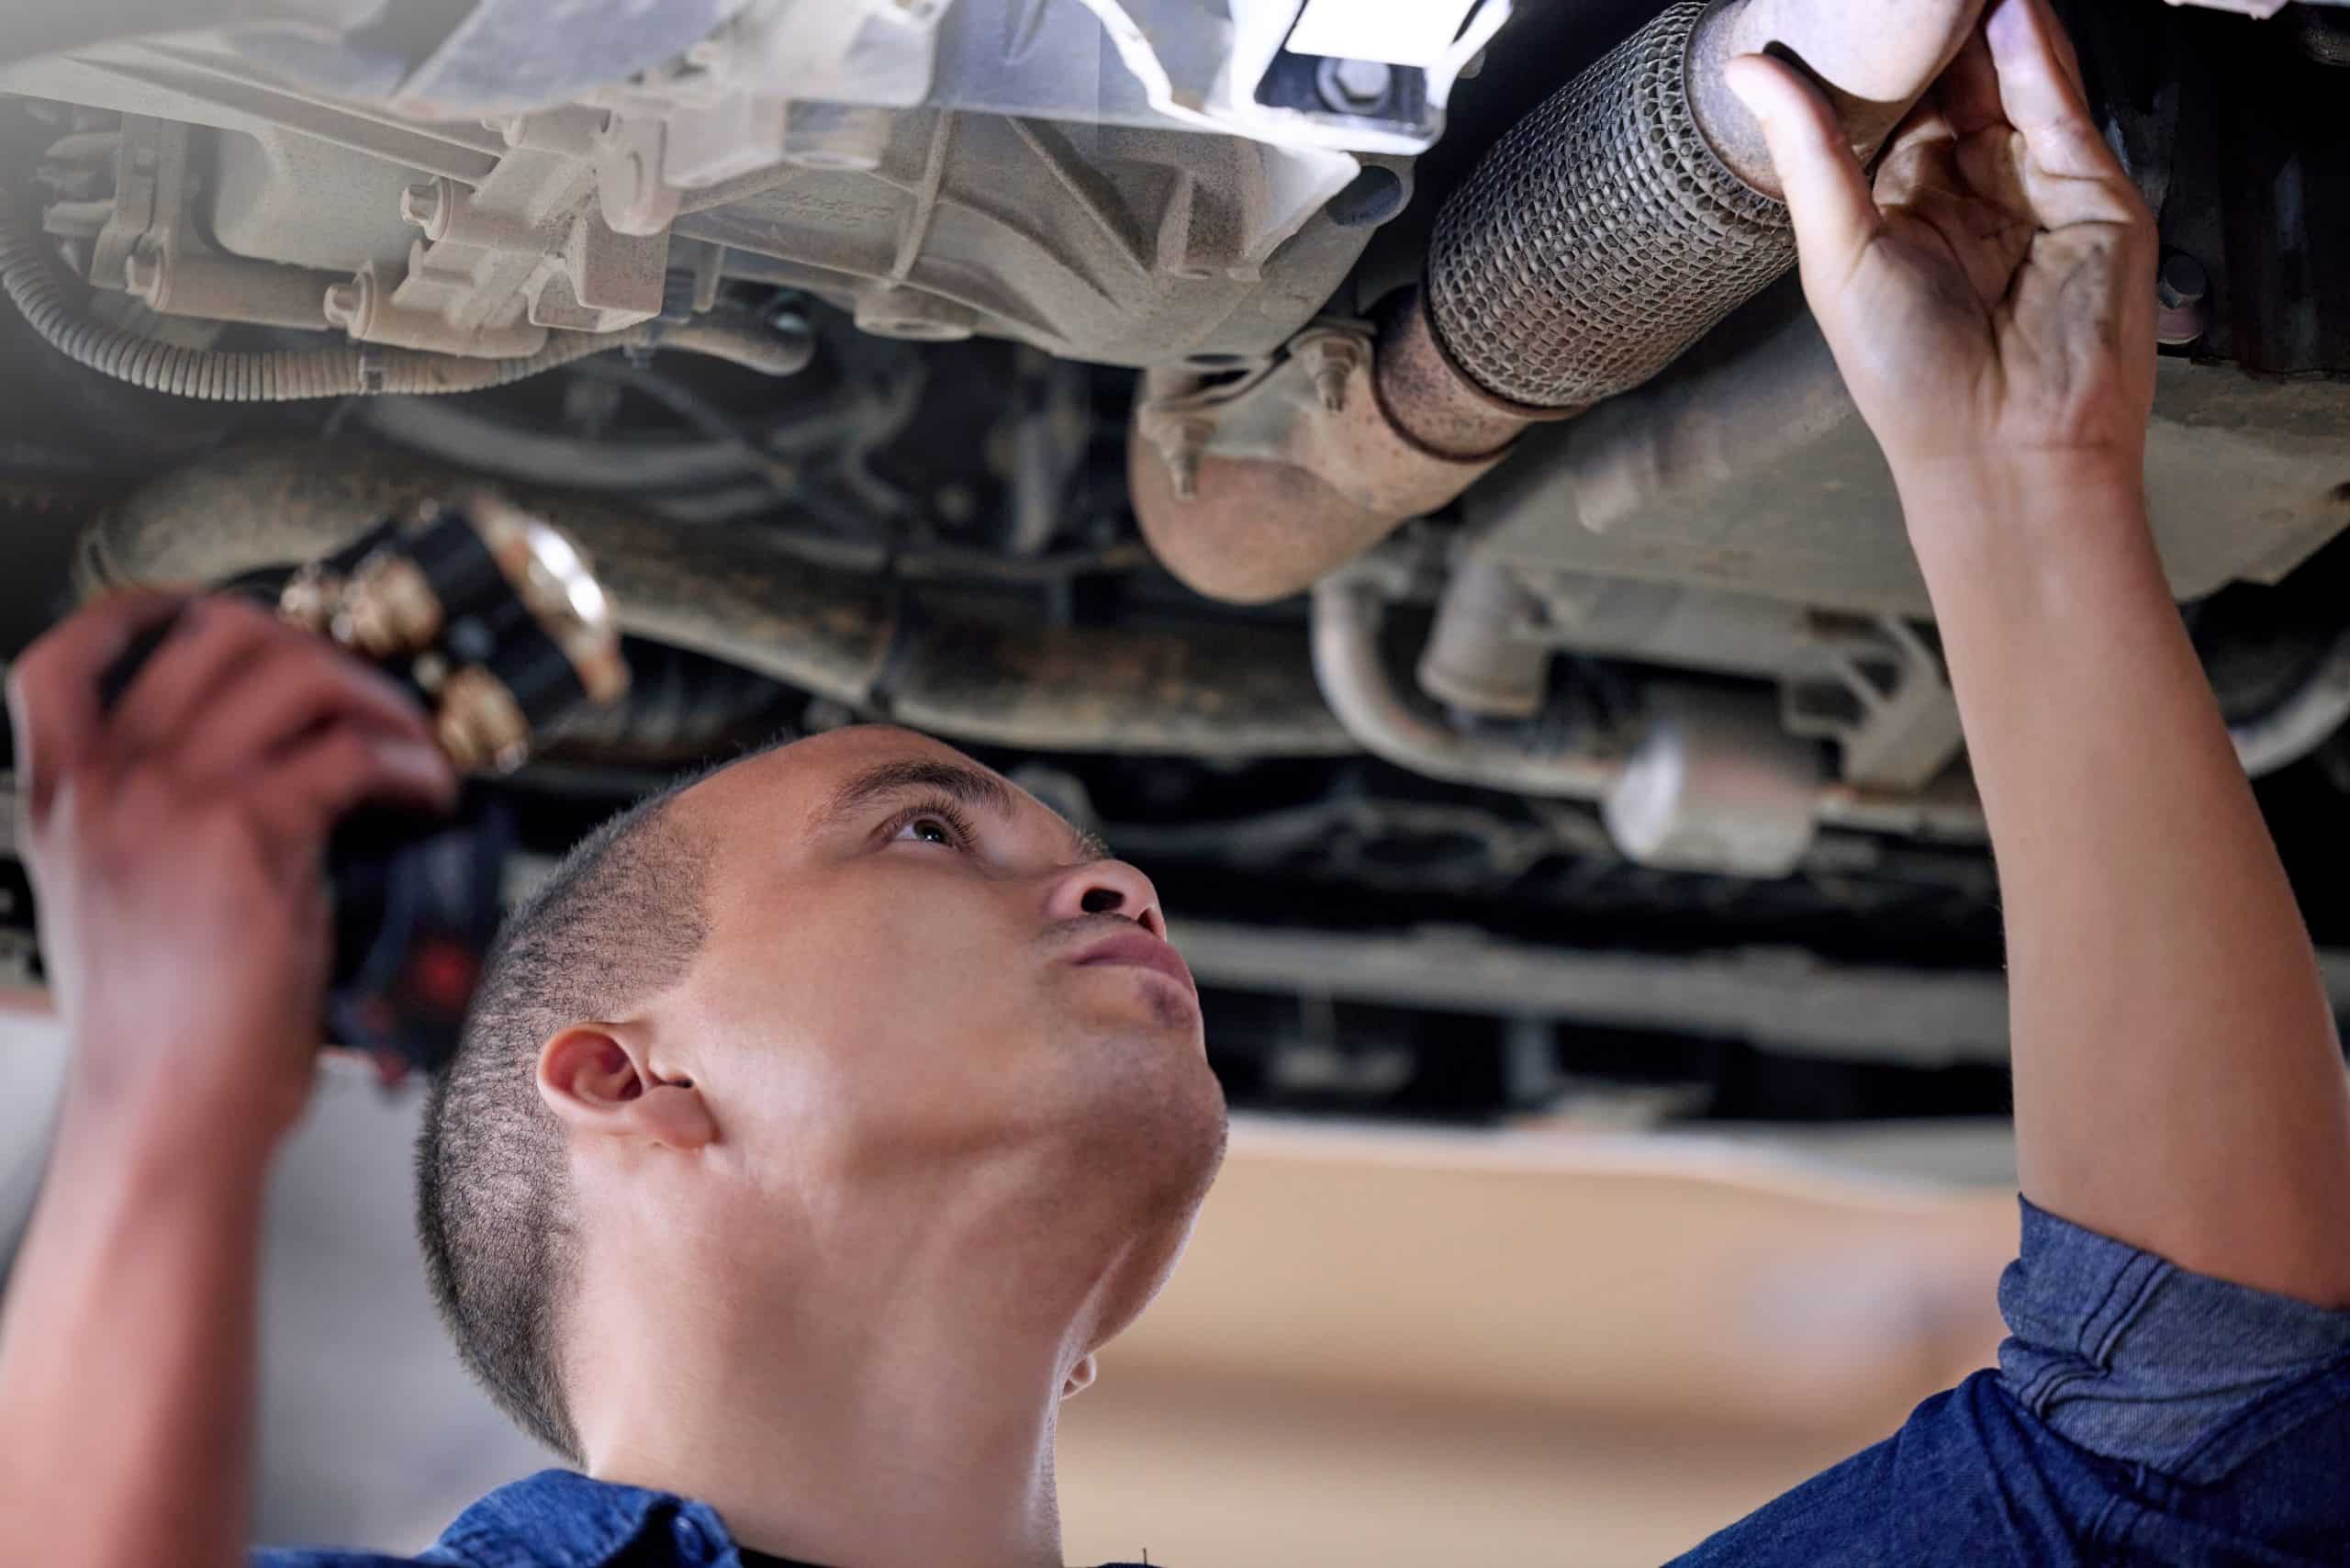 Car mechanic conducting a service inspection, identifying and addressing potential car leaking issues.